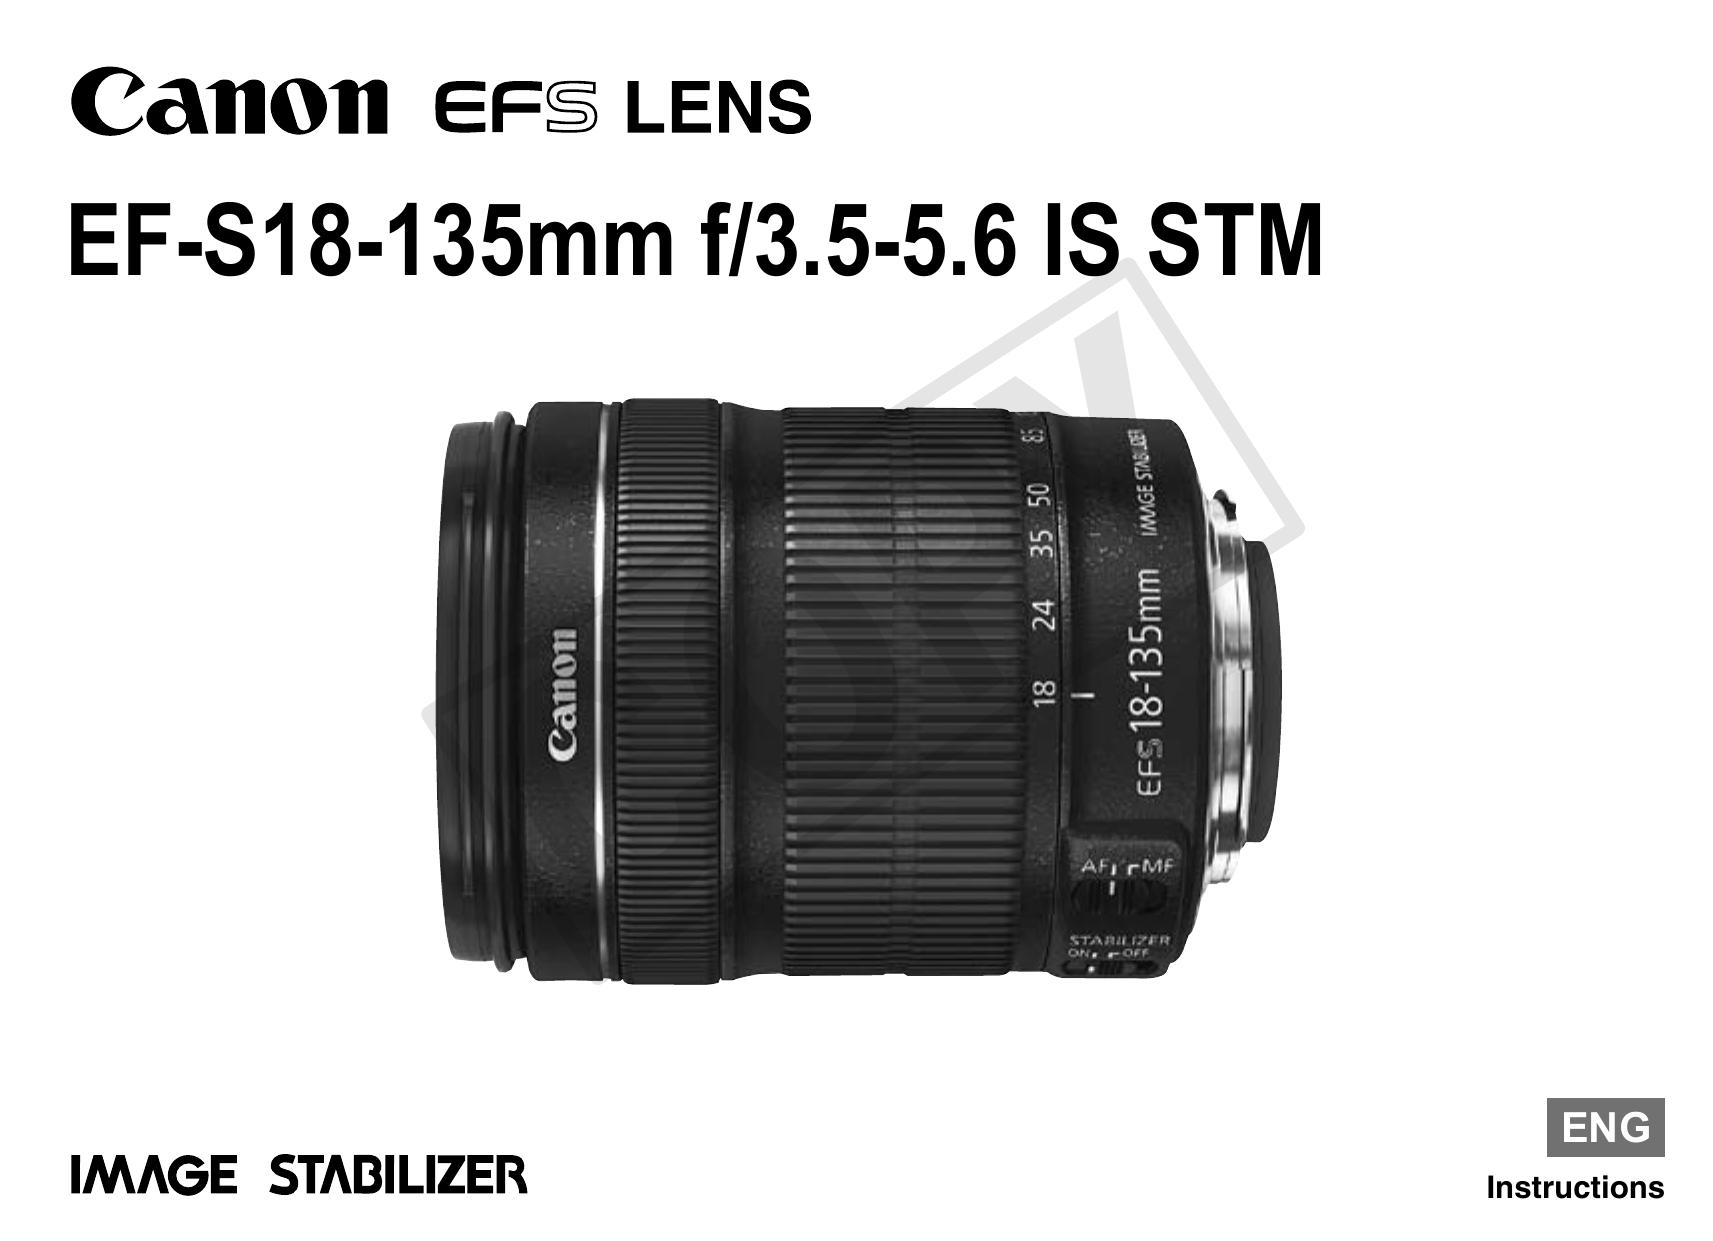 Canon 18-135mm f/3.5-5.6 IS EFS Camera Lens User Manual